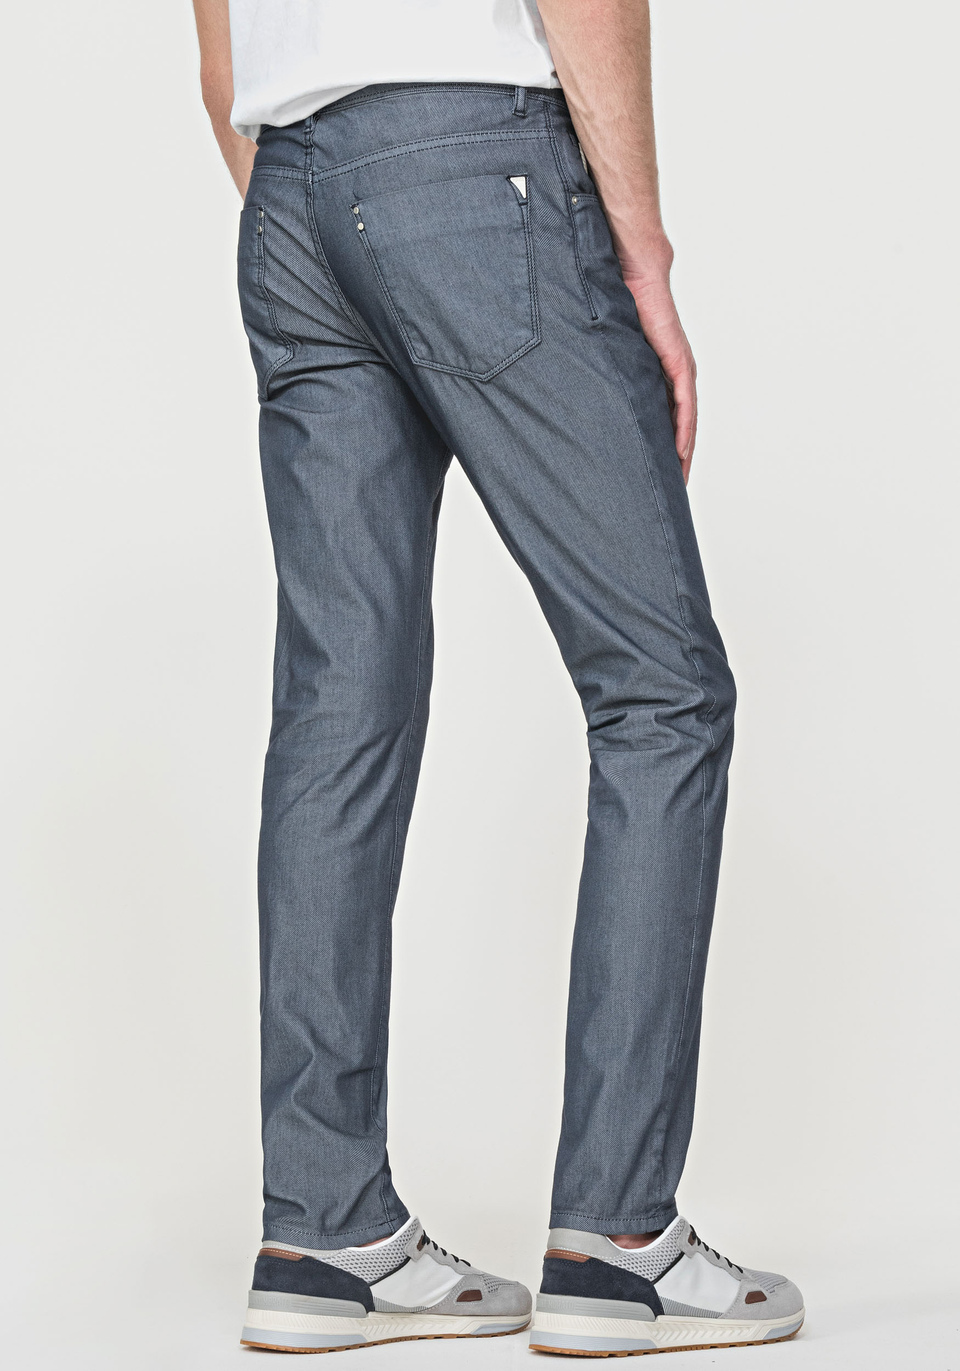 “BARRET” SKINNY-FIT TROUSERS IN STRETCH COTTON BLEND - Antony Morato Online Shop